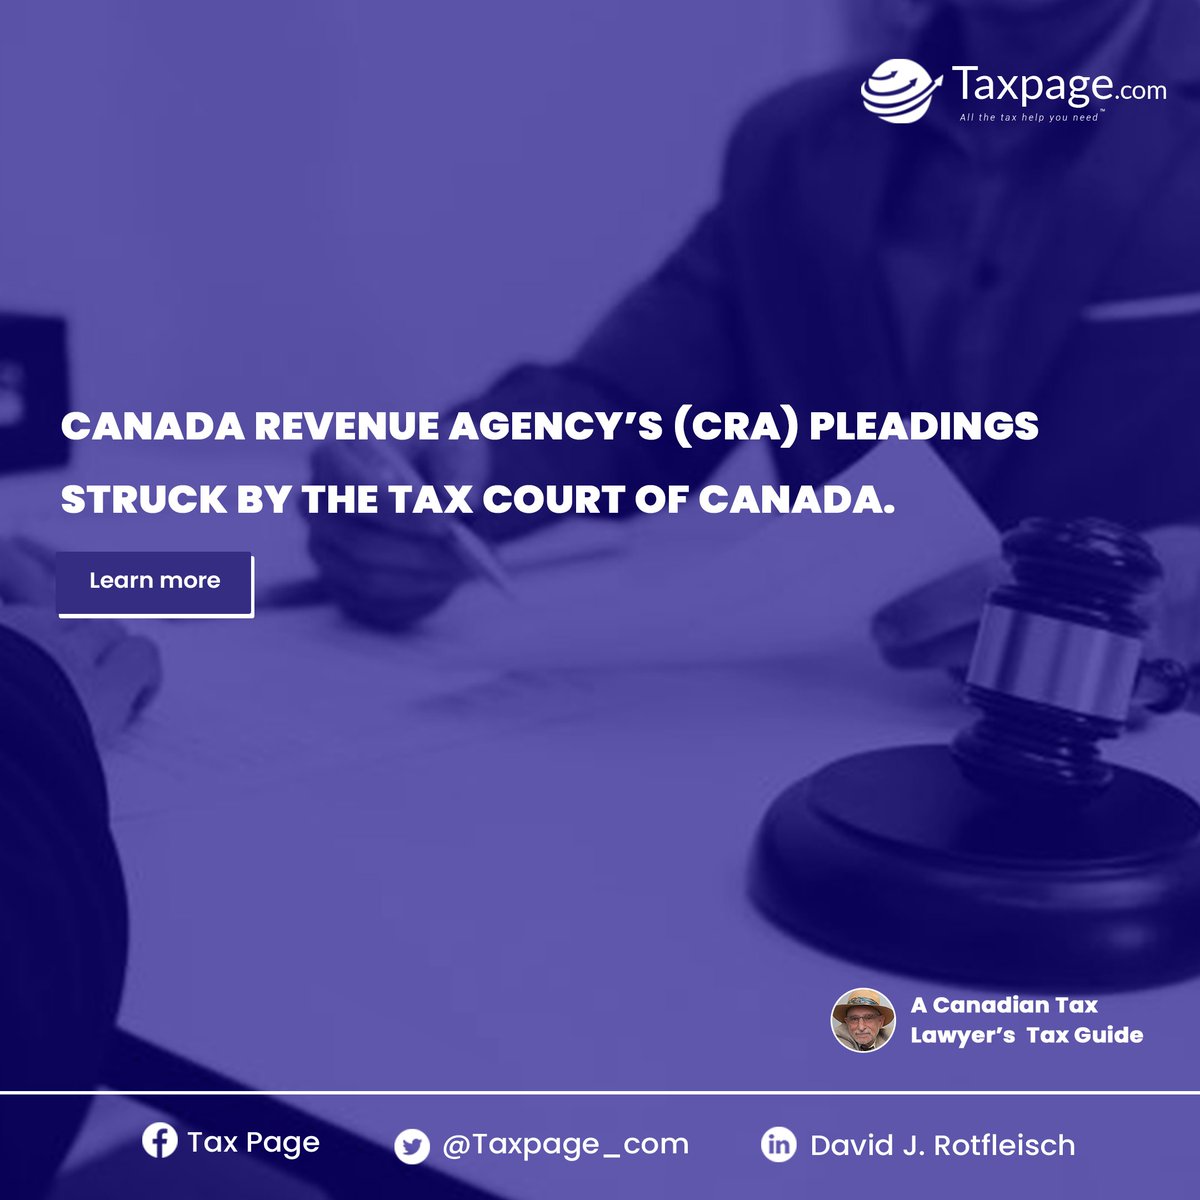 Canada Revenue Agency’s (CRA) pleadings struck by the Tax Court of Canada

#Thread 

#Taxpage #Taxlitigation #CRA #Canada